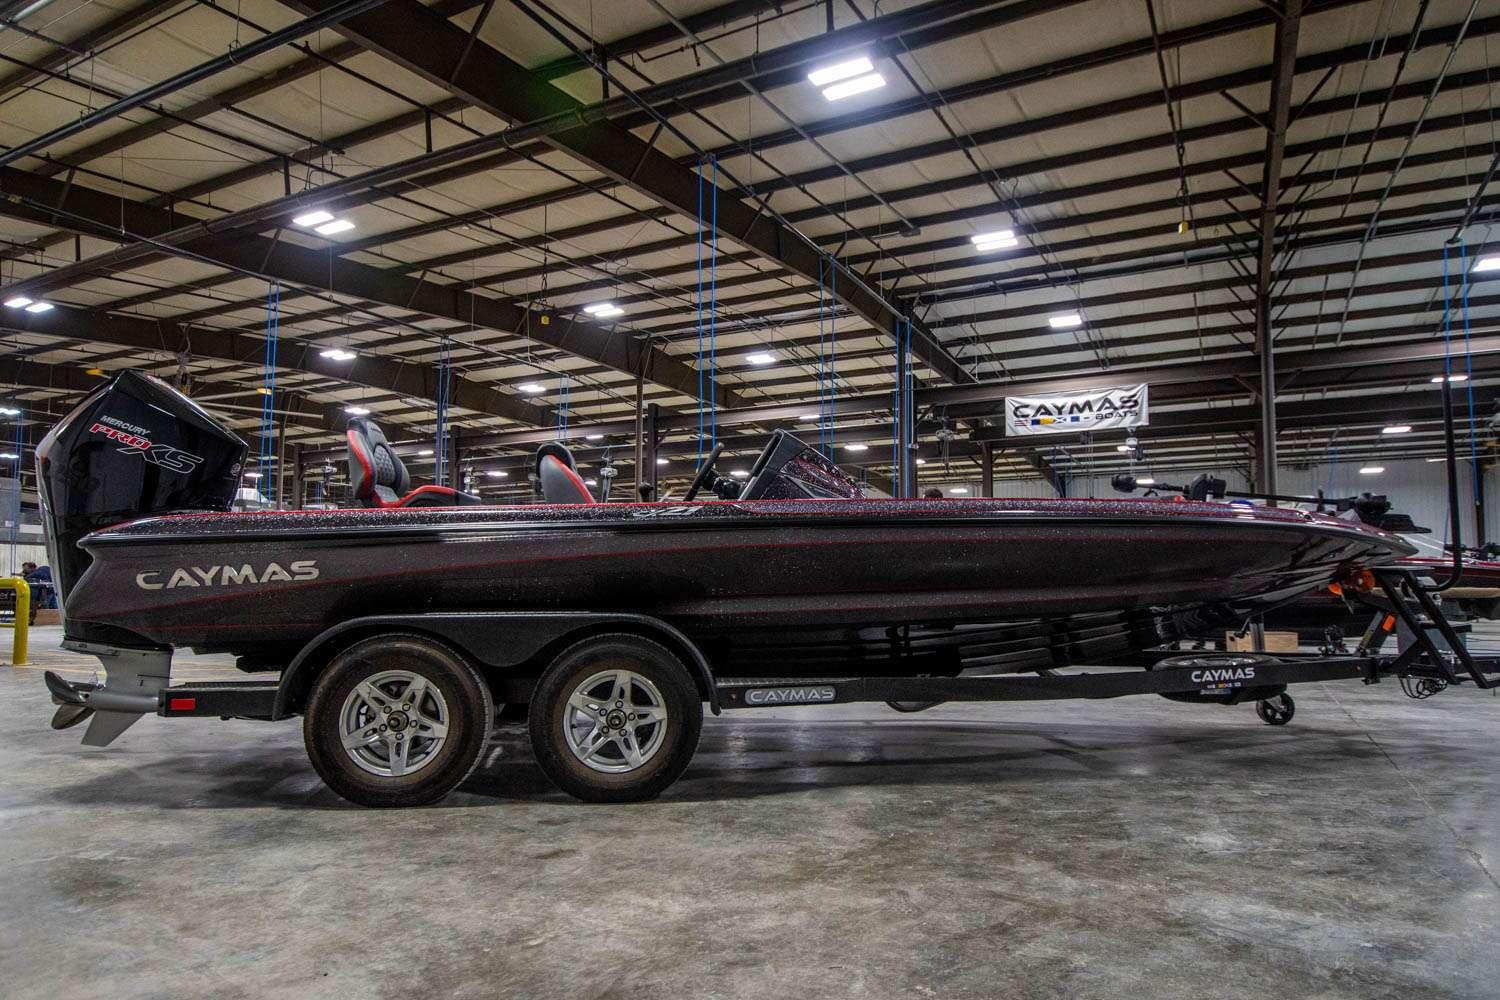 Longtime boat builder and Hall of Famer Earl Bentz has returned to the bass boat business with the opening of his new company, Caymas Boats. His first product for bass anglers is the super sleek Caymas CX 21.